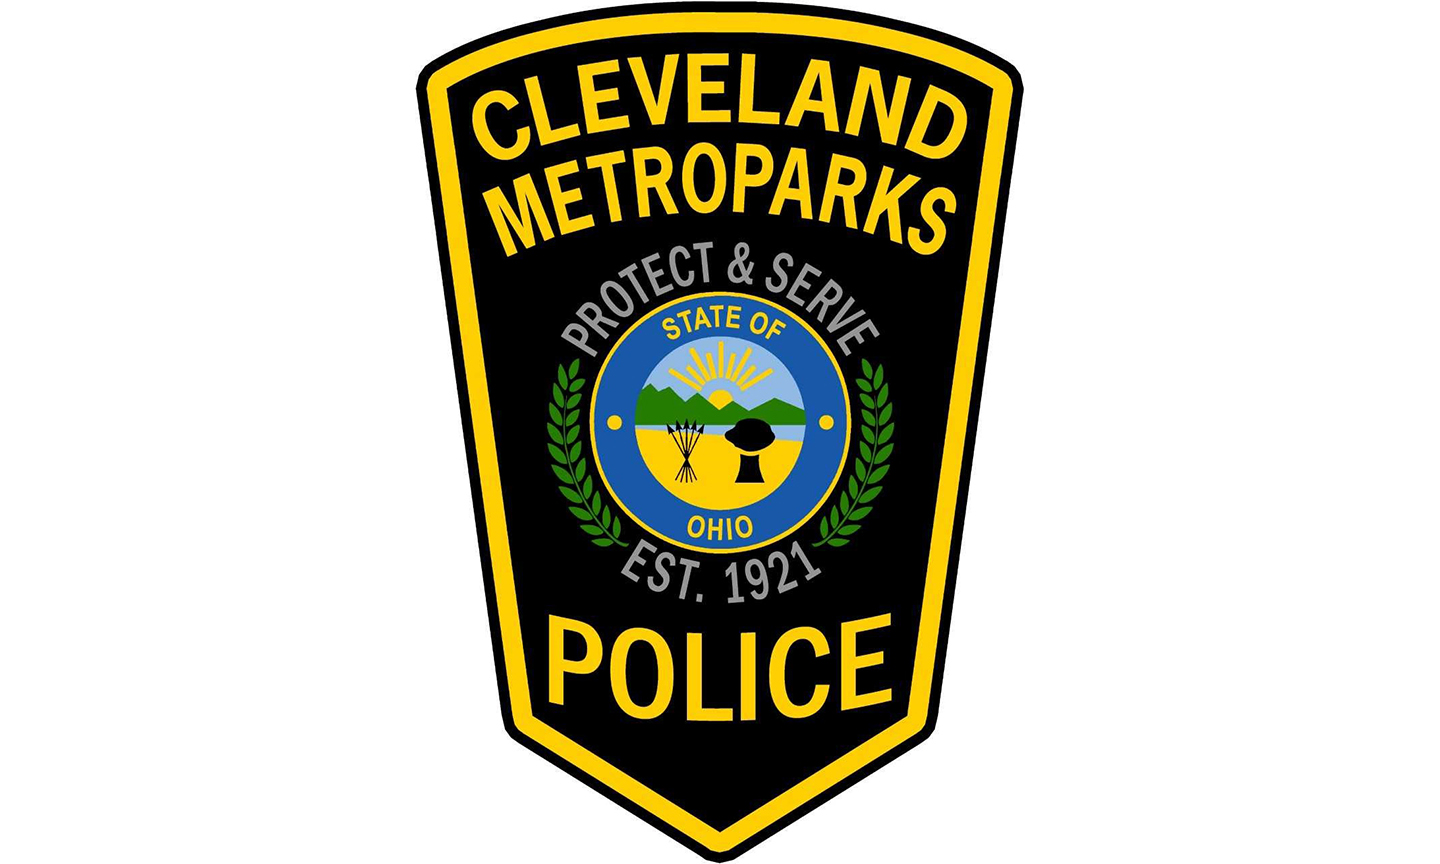 About the Cleveland Metroparks Police Department